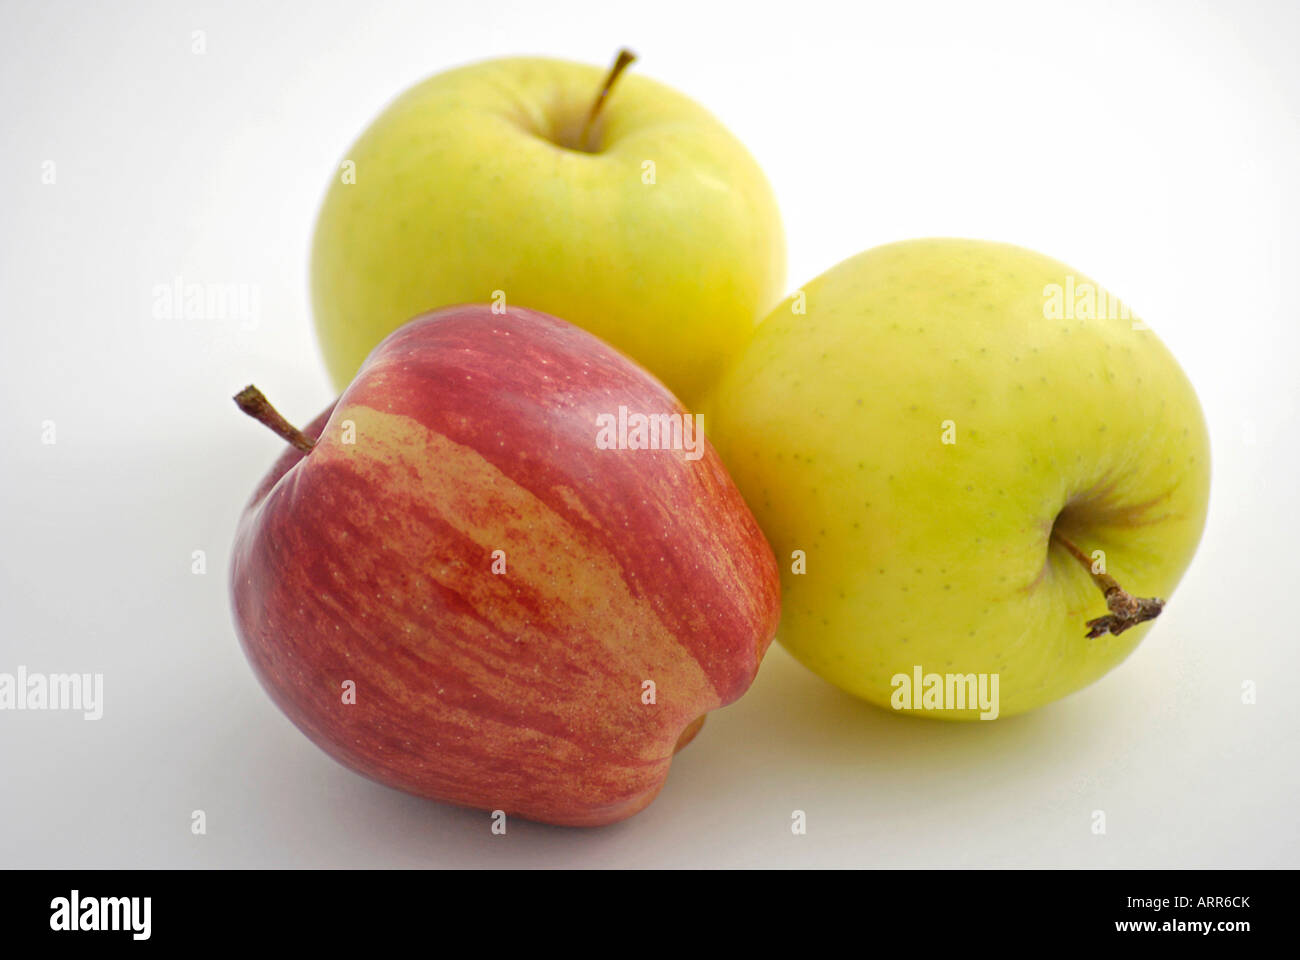 A Red Delicious apple and two Golden Delicious Apples Stock Photo